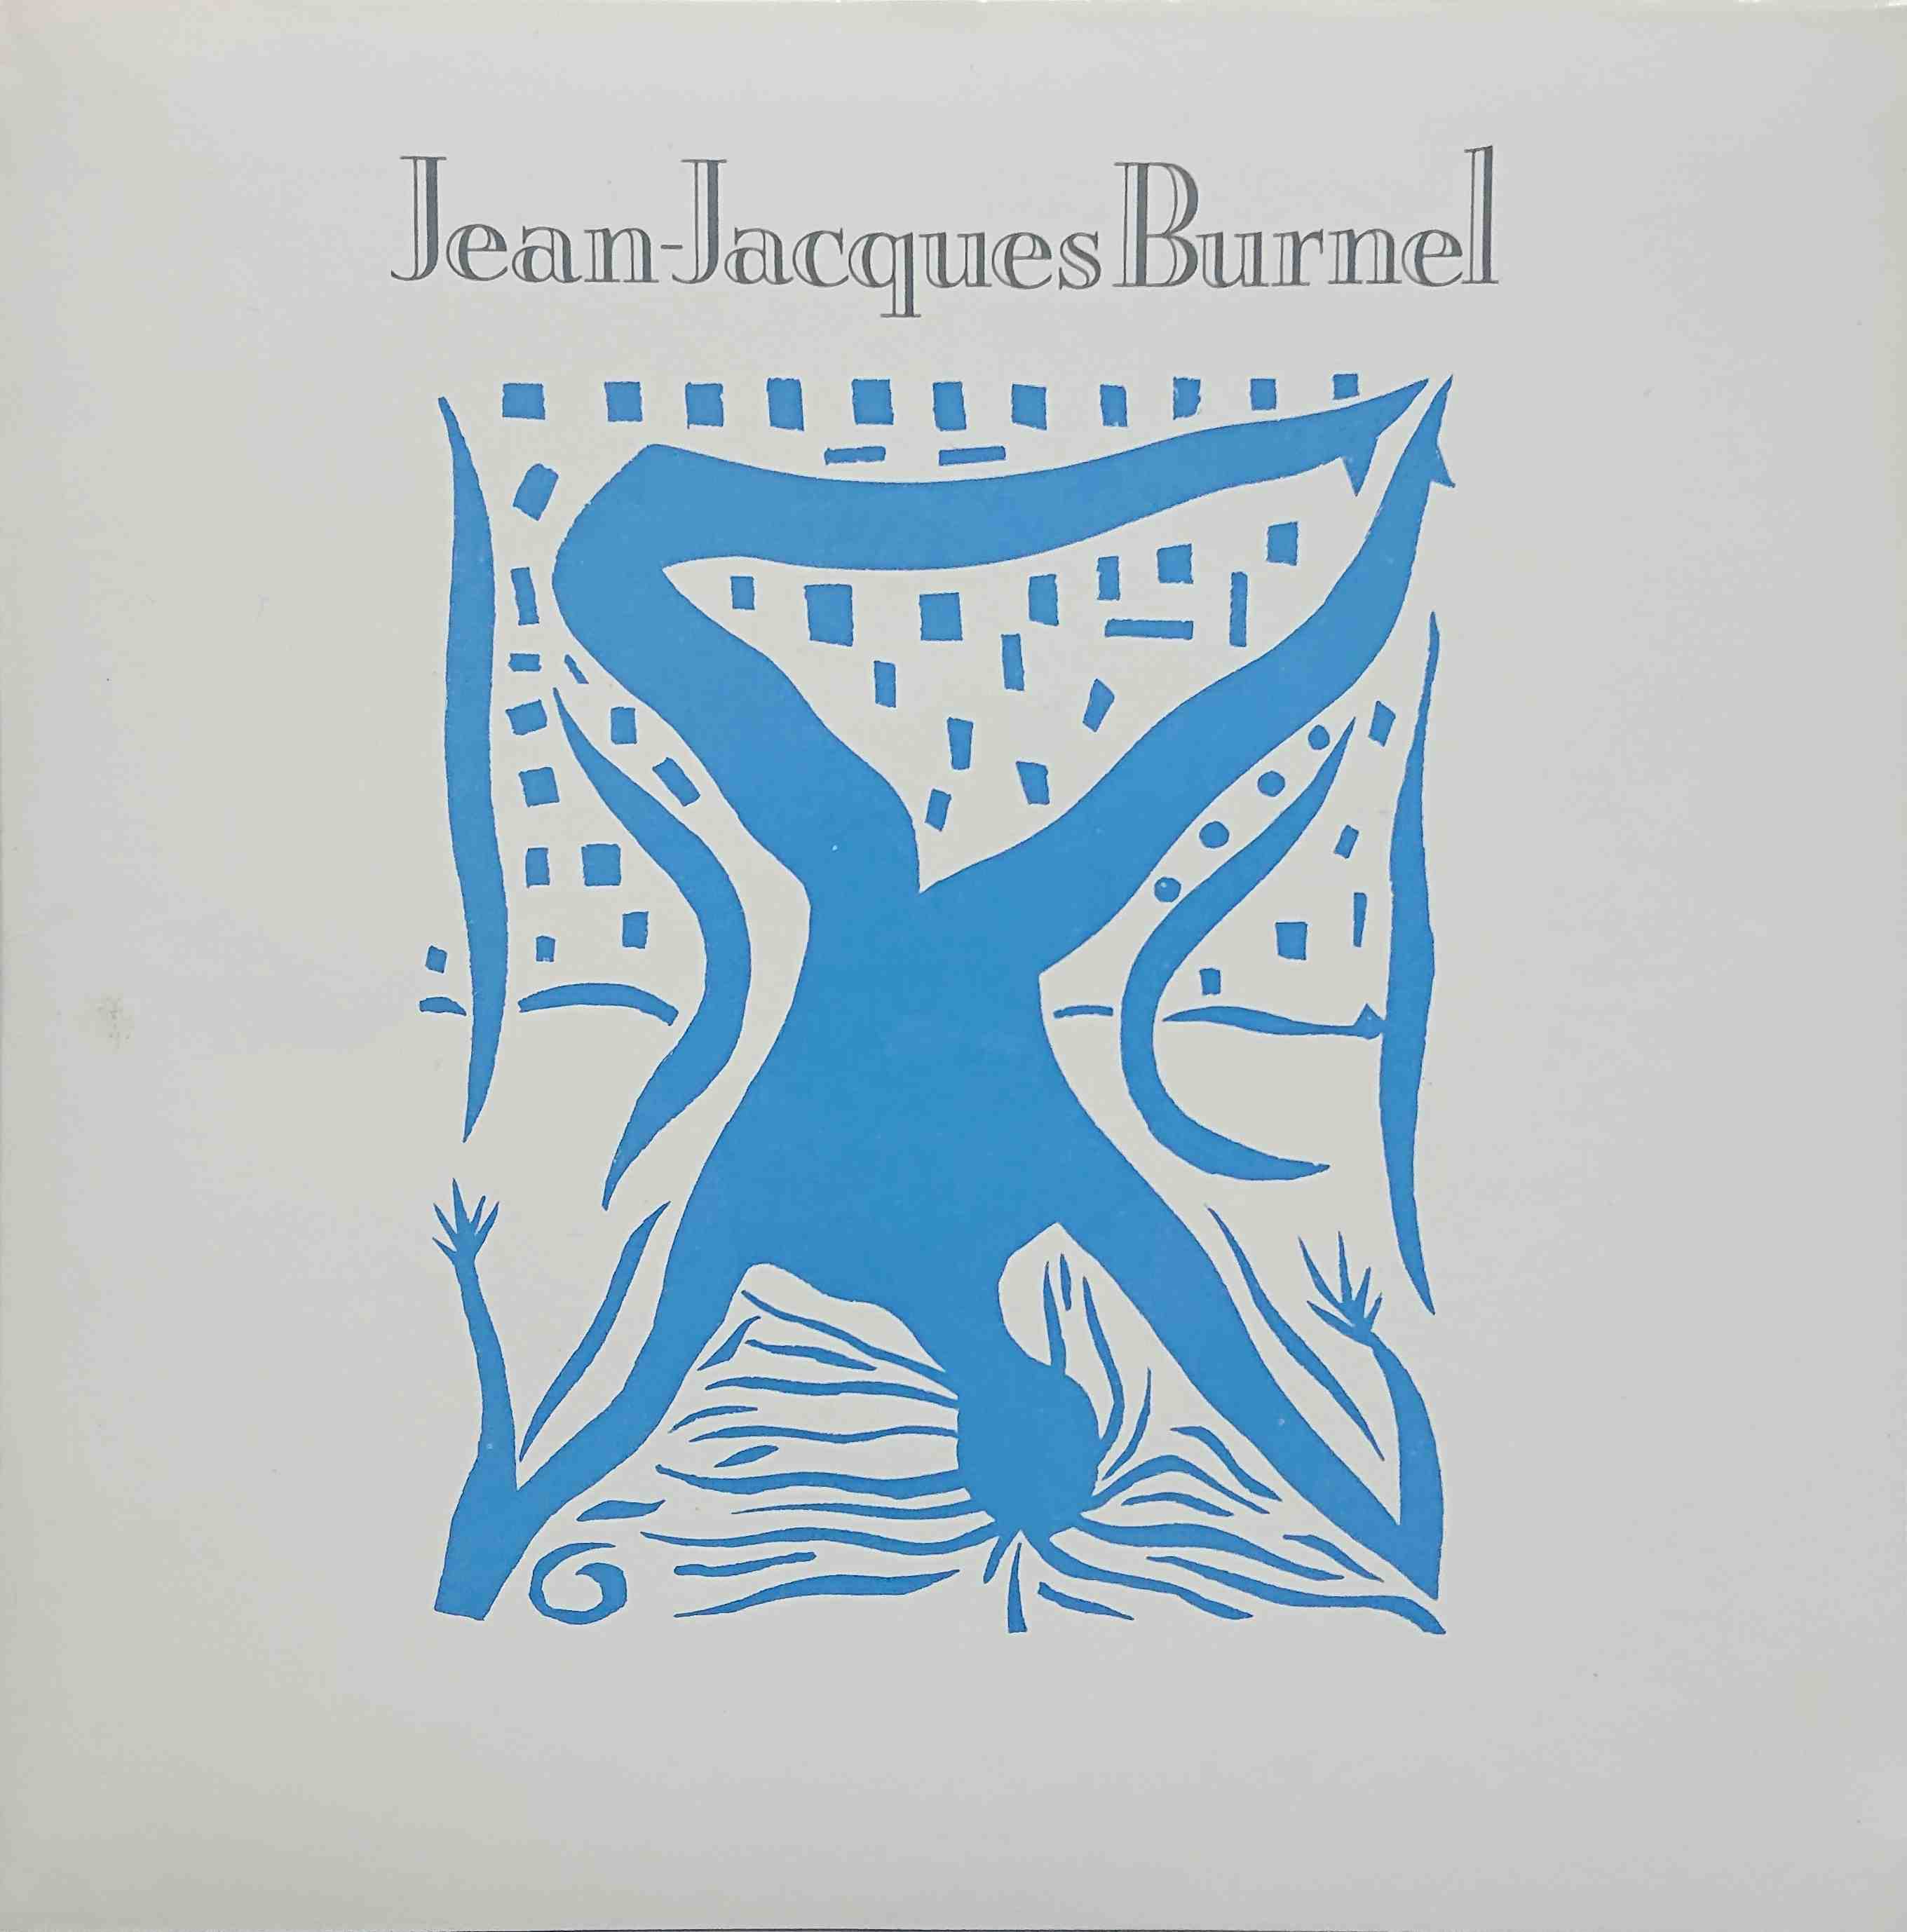 Picture of Girl from the snow country by artist Jean Jacques Burnel from The Stranglers singles